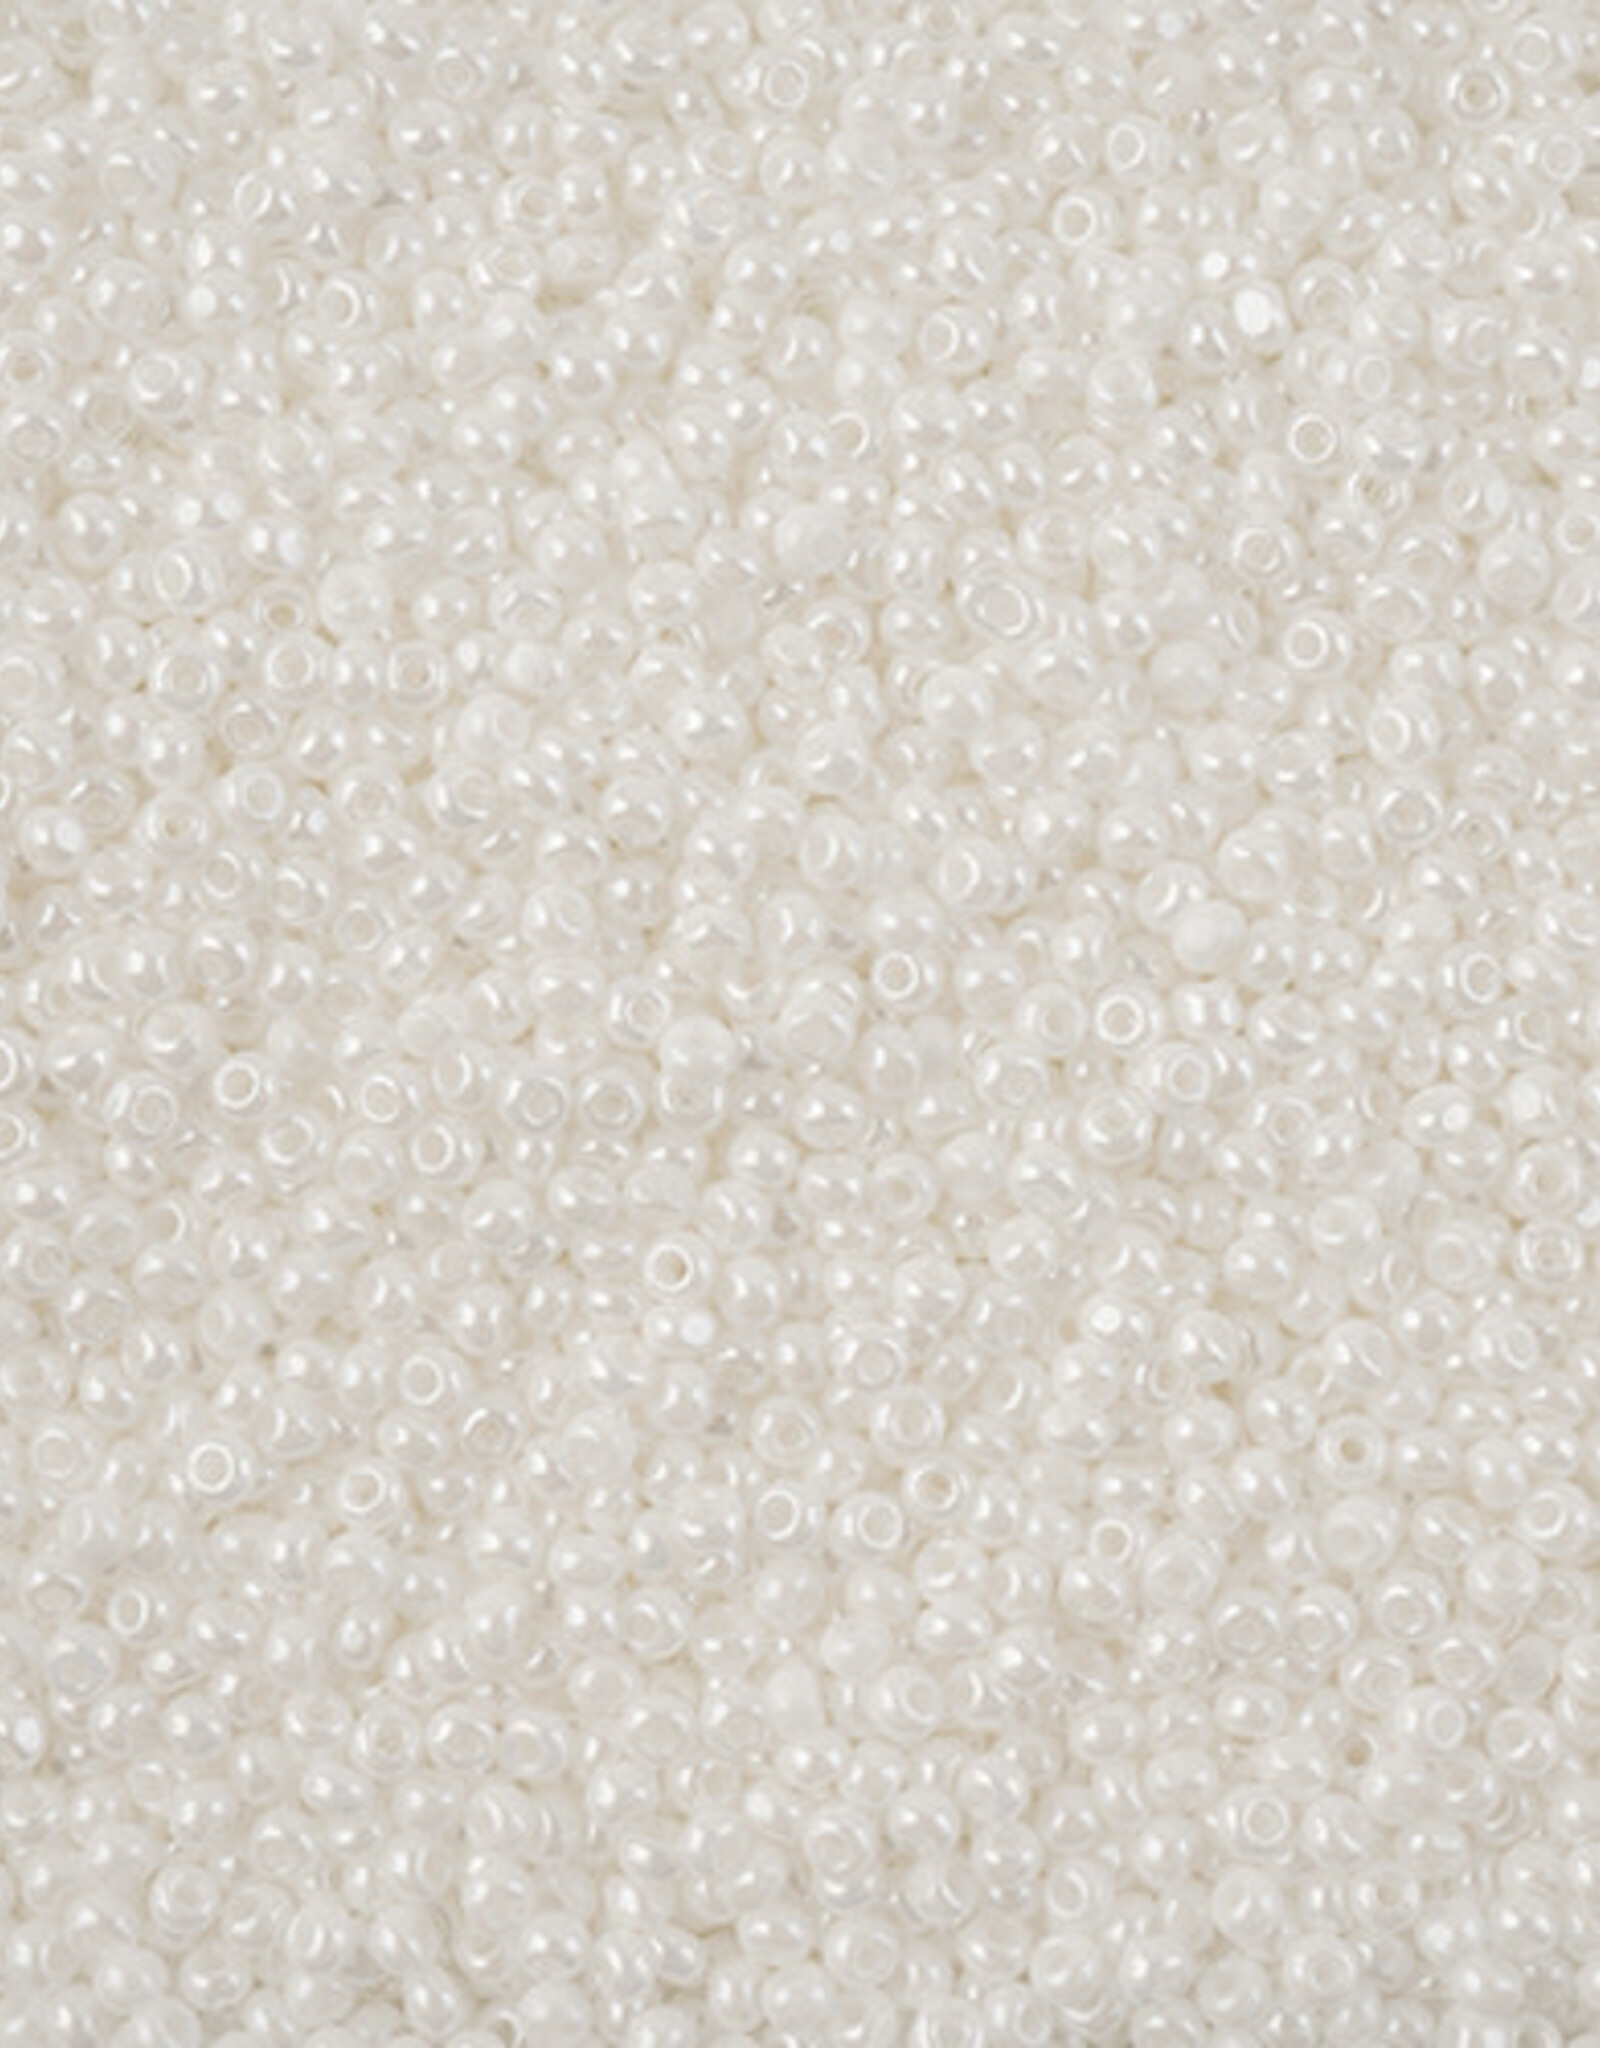 Czech Seed Bead 11/0 Cut Opaque White Luster 100 G bag Loose